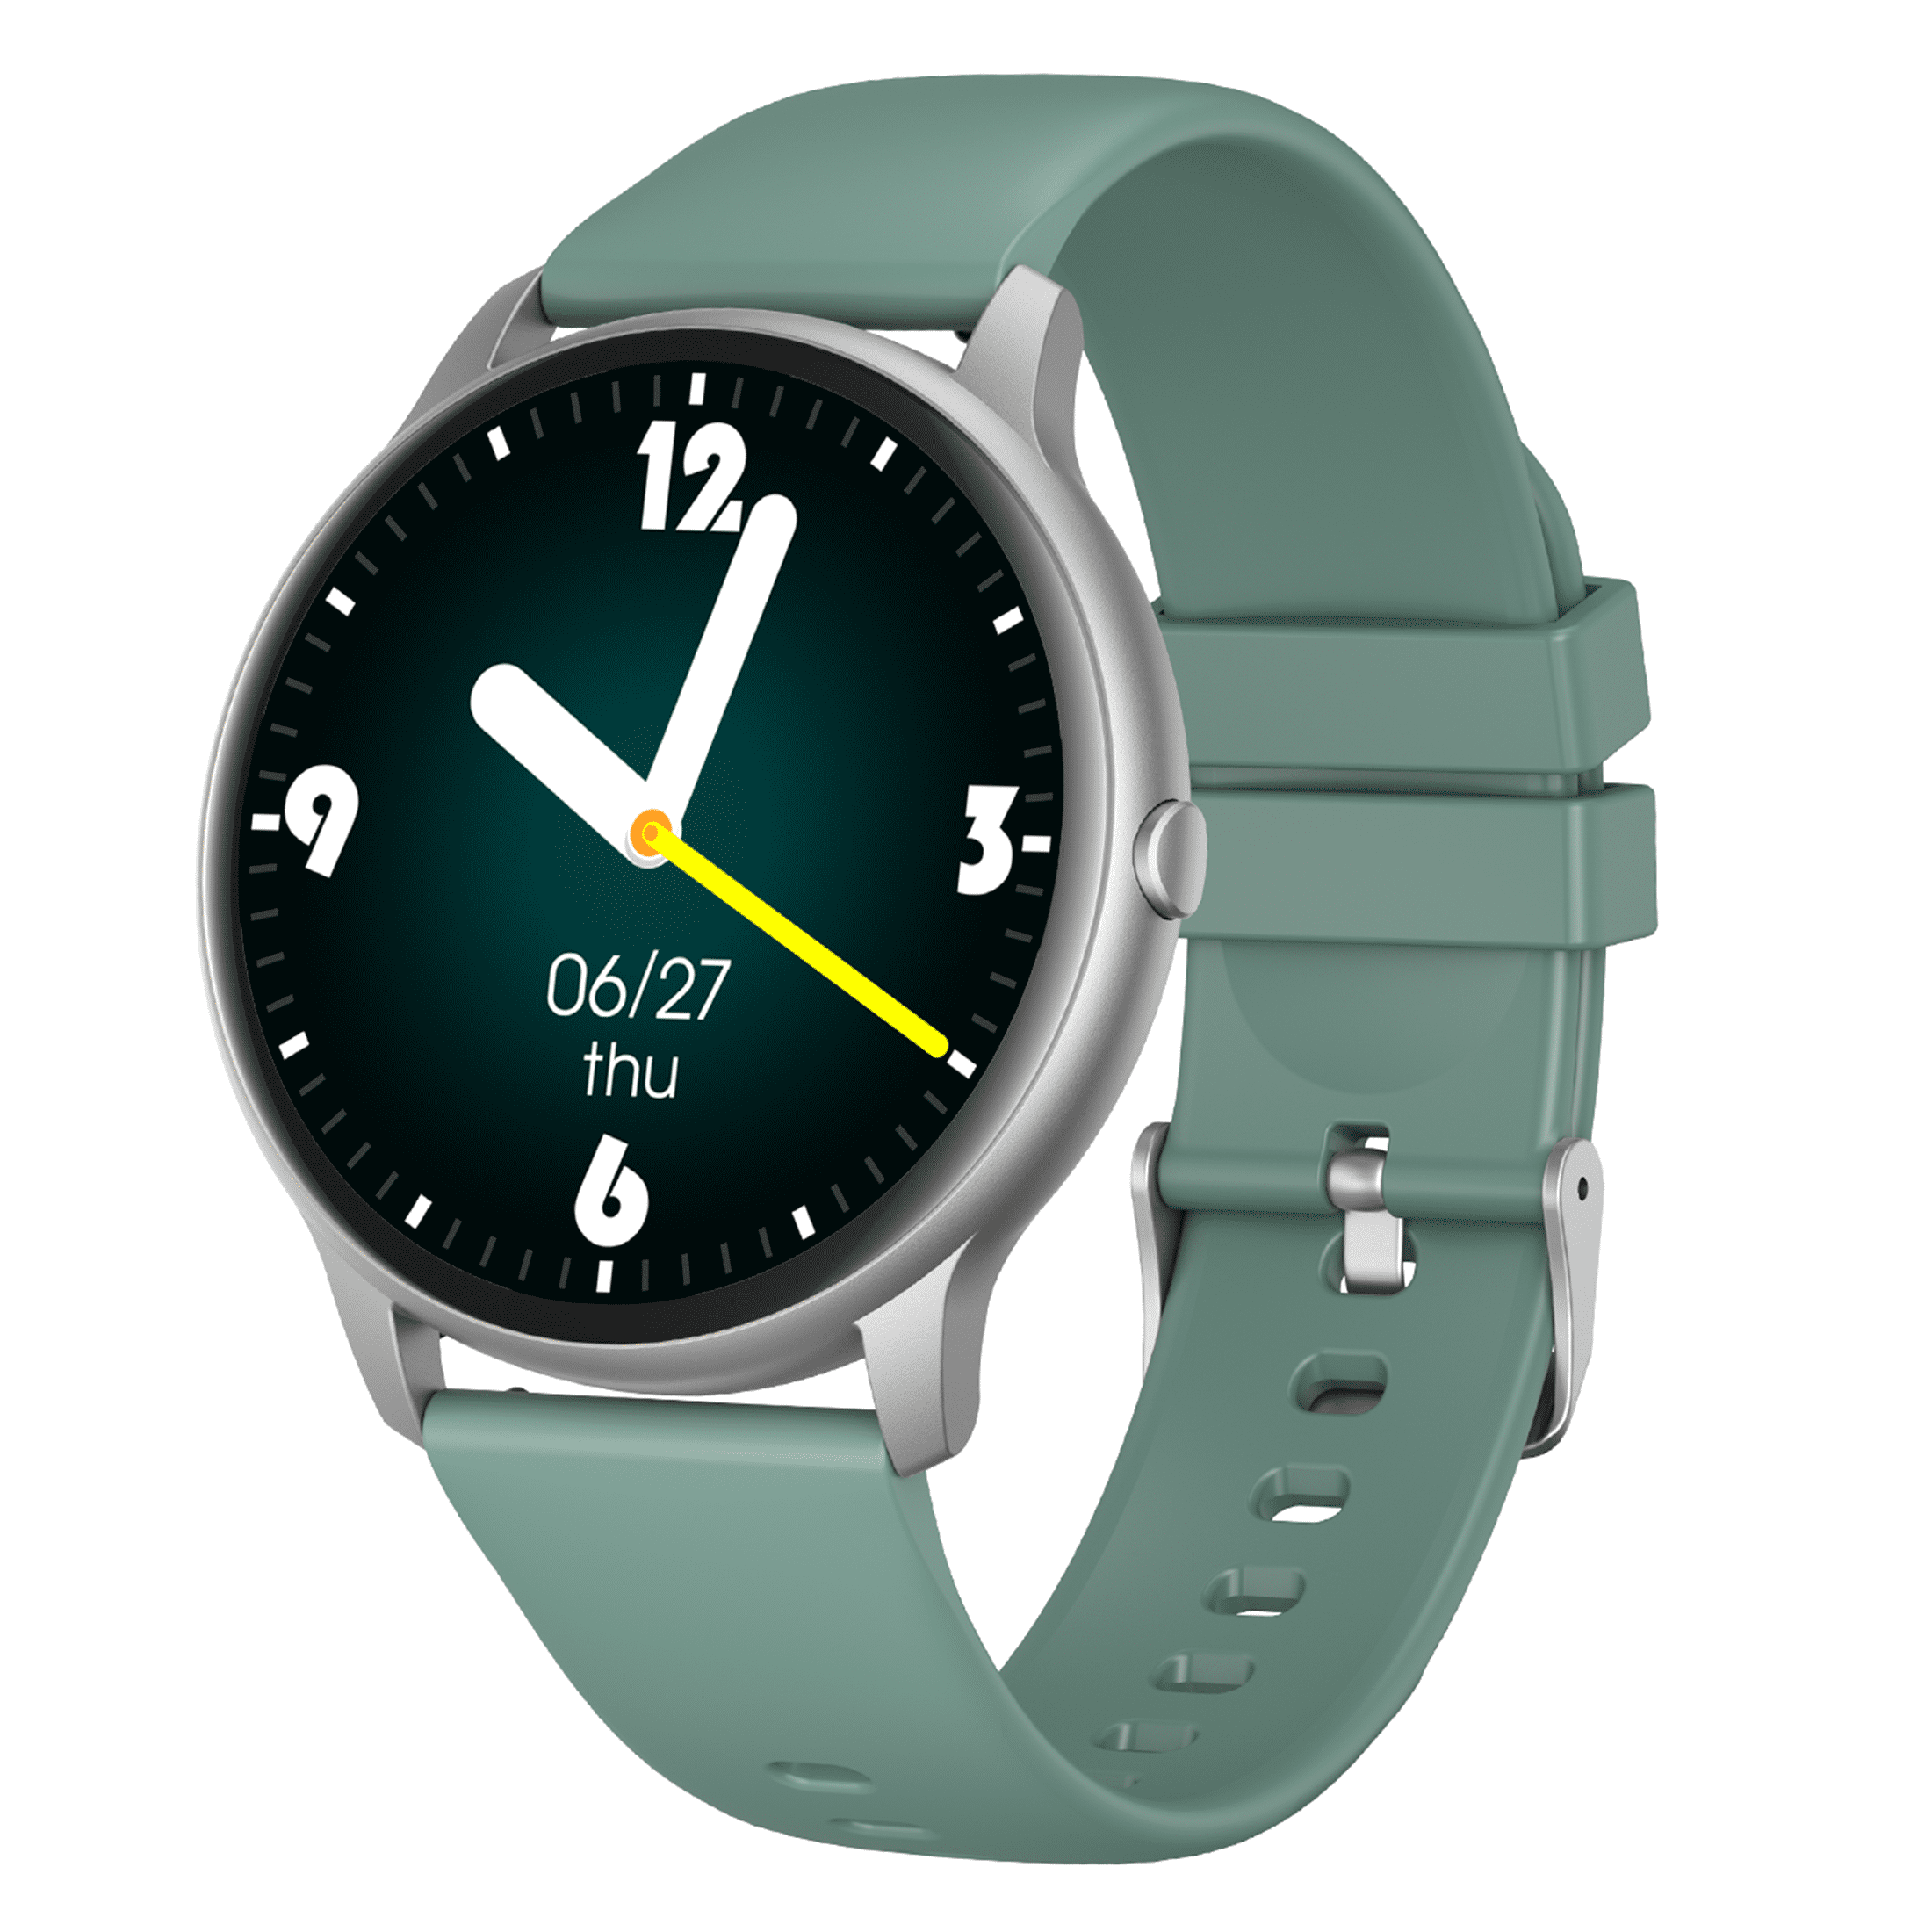 YAMAY Round Smart Watch for Men Women, Fitness Tracker with Rate Monitor, Custom Watch Face, IP68 Waterproof, - Walmart.com